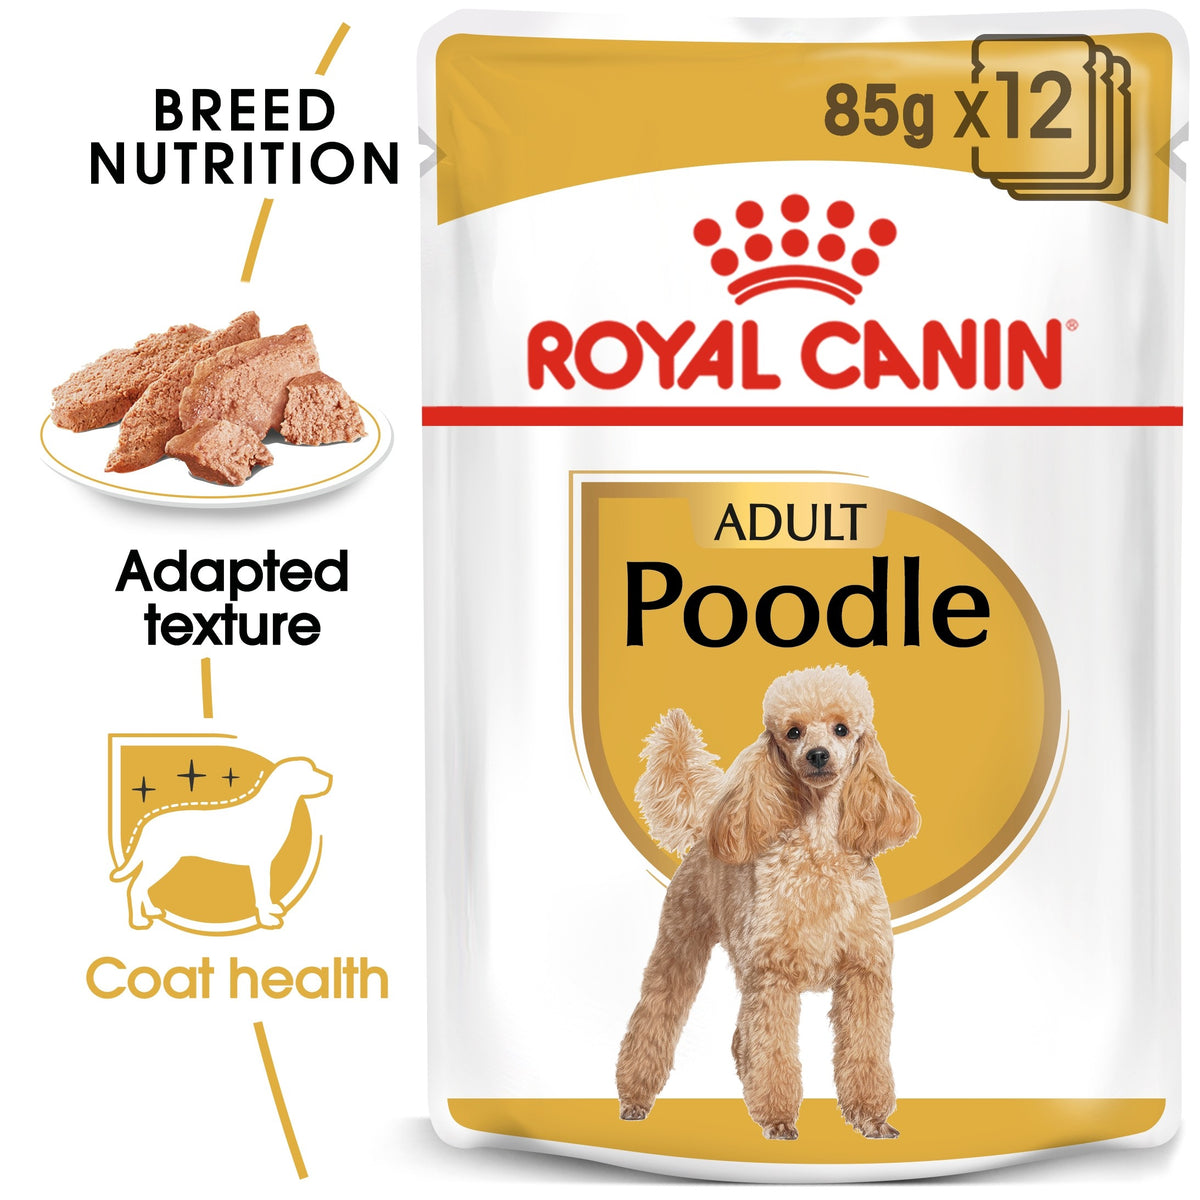 BREED HEALTH NUTRITION POODLE ADULT (WET FOOD - POUCHES) (4598153248821)